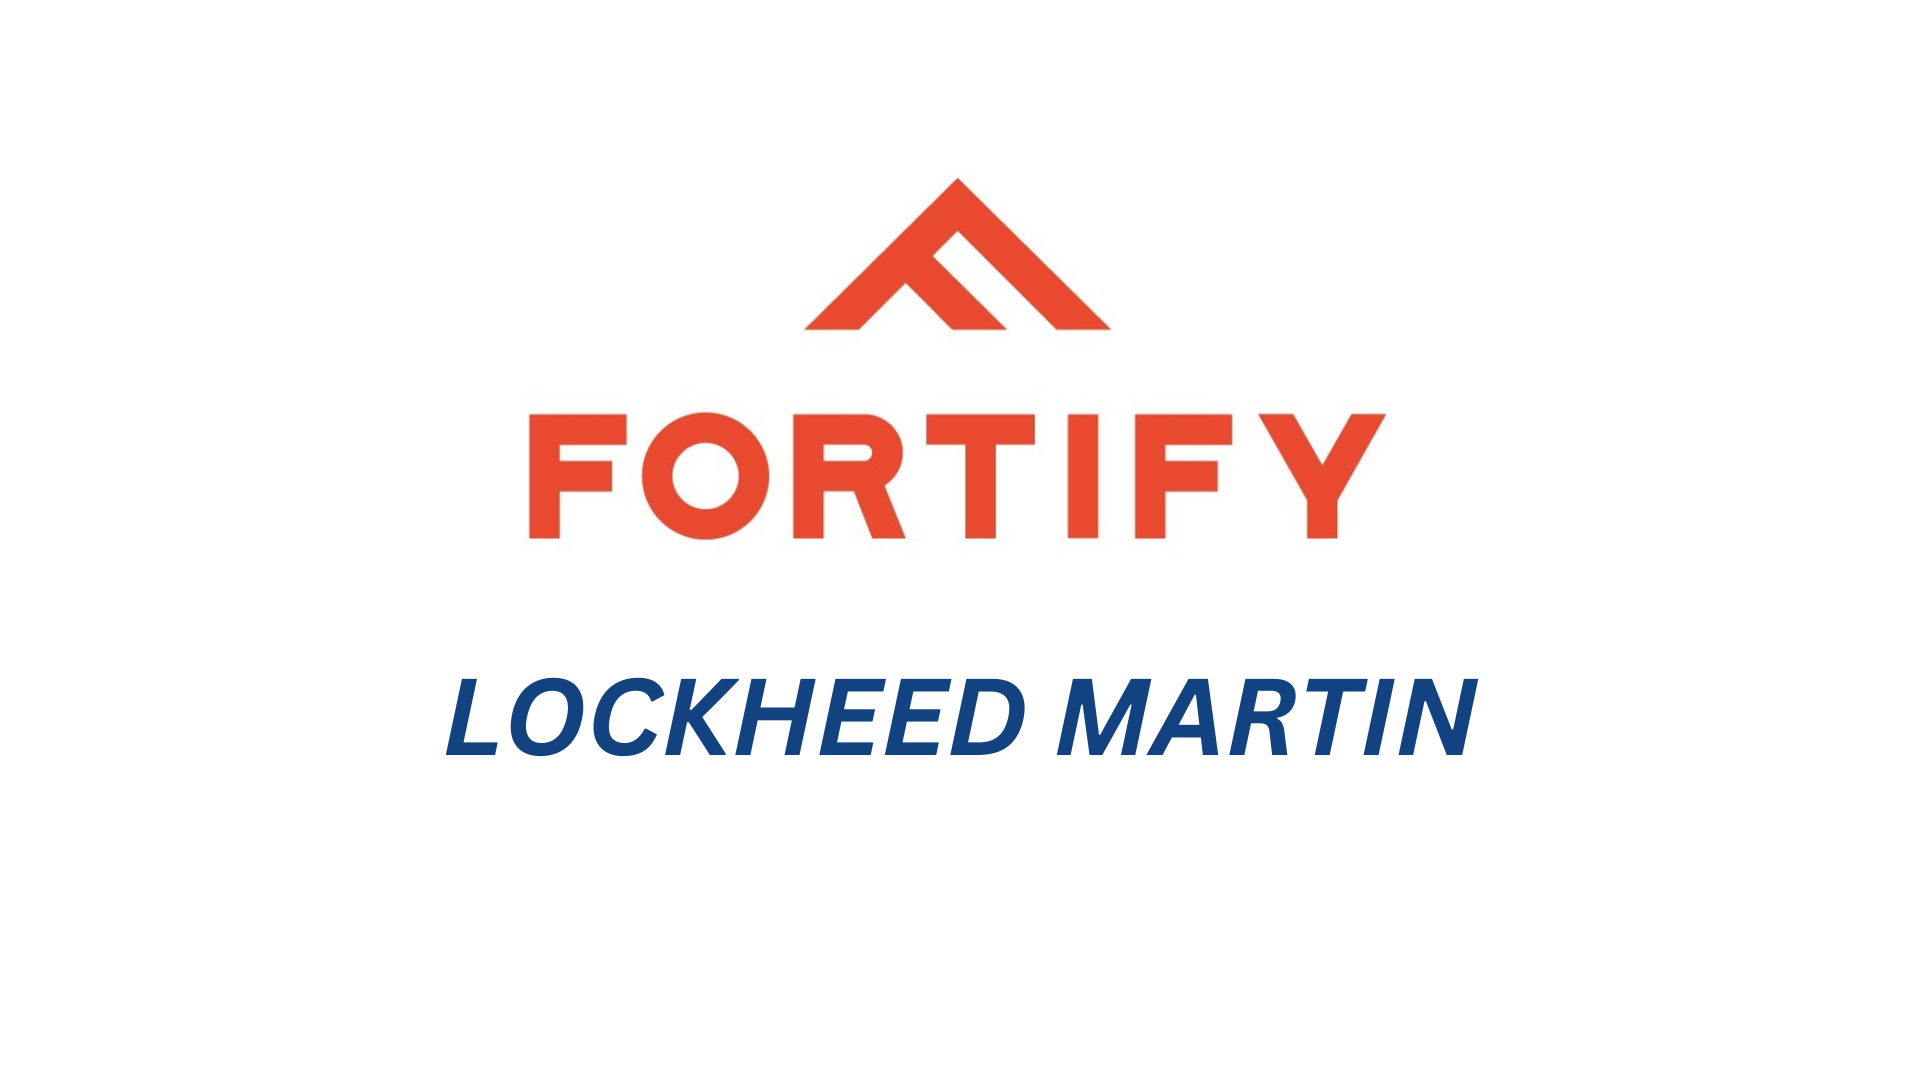 Fortify has received investment from Lockheed Martin for development of additive manufacturing of radio frequency devices.